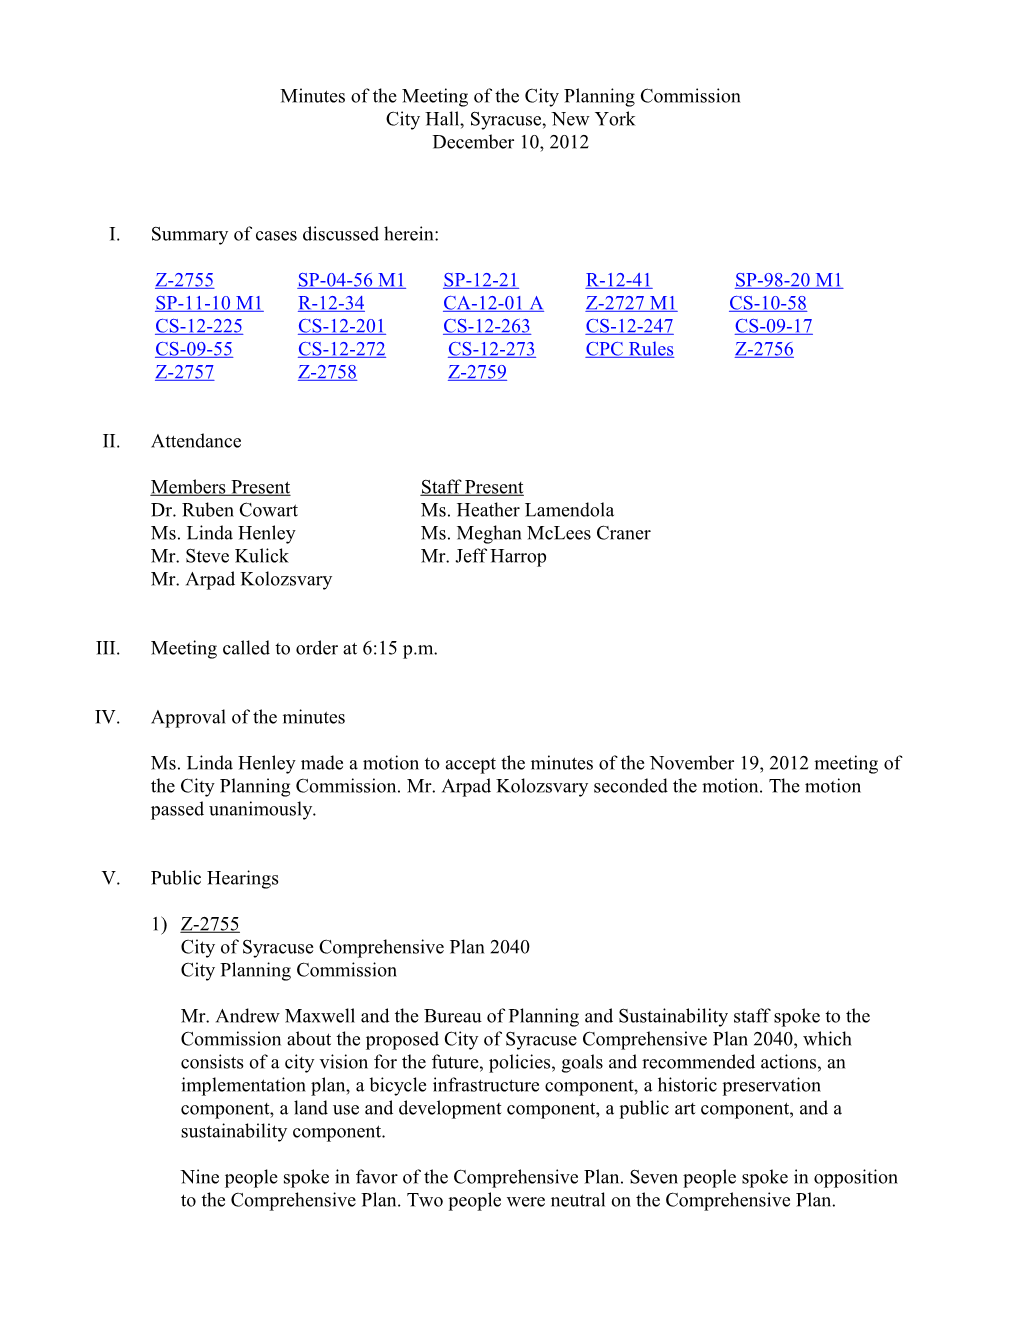 Agenda of the Meeting of Thecity Planning Commission s3